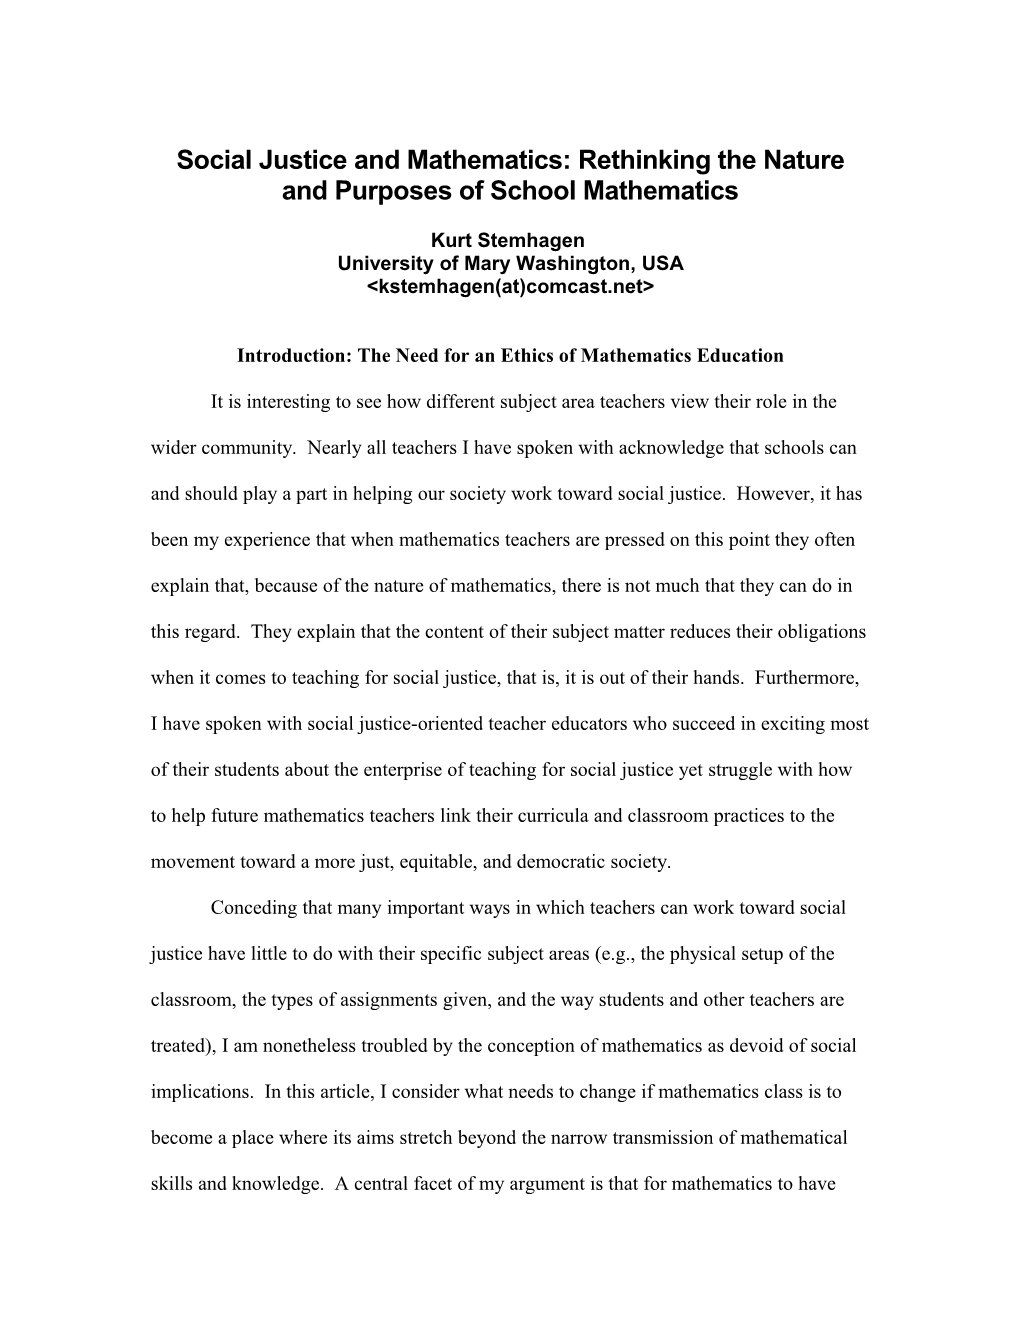 My Dissertation Is an Effort to Present a Useful and Different Philosophy of Mathematics